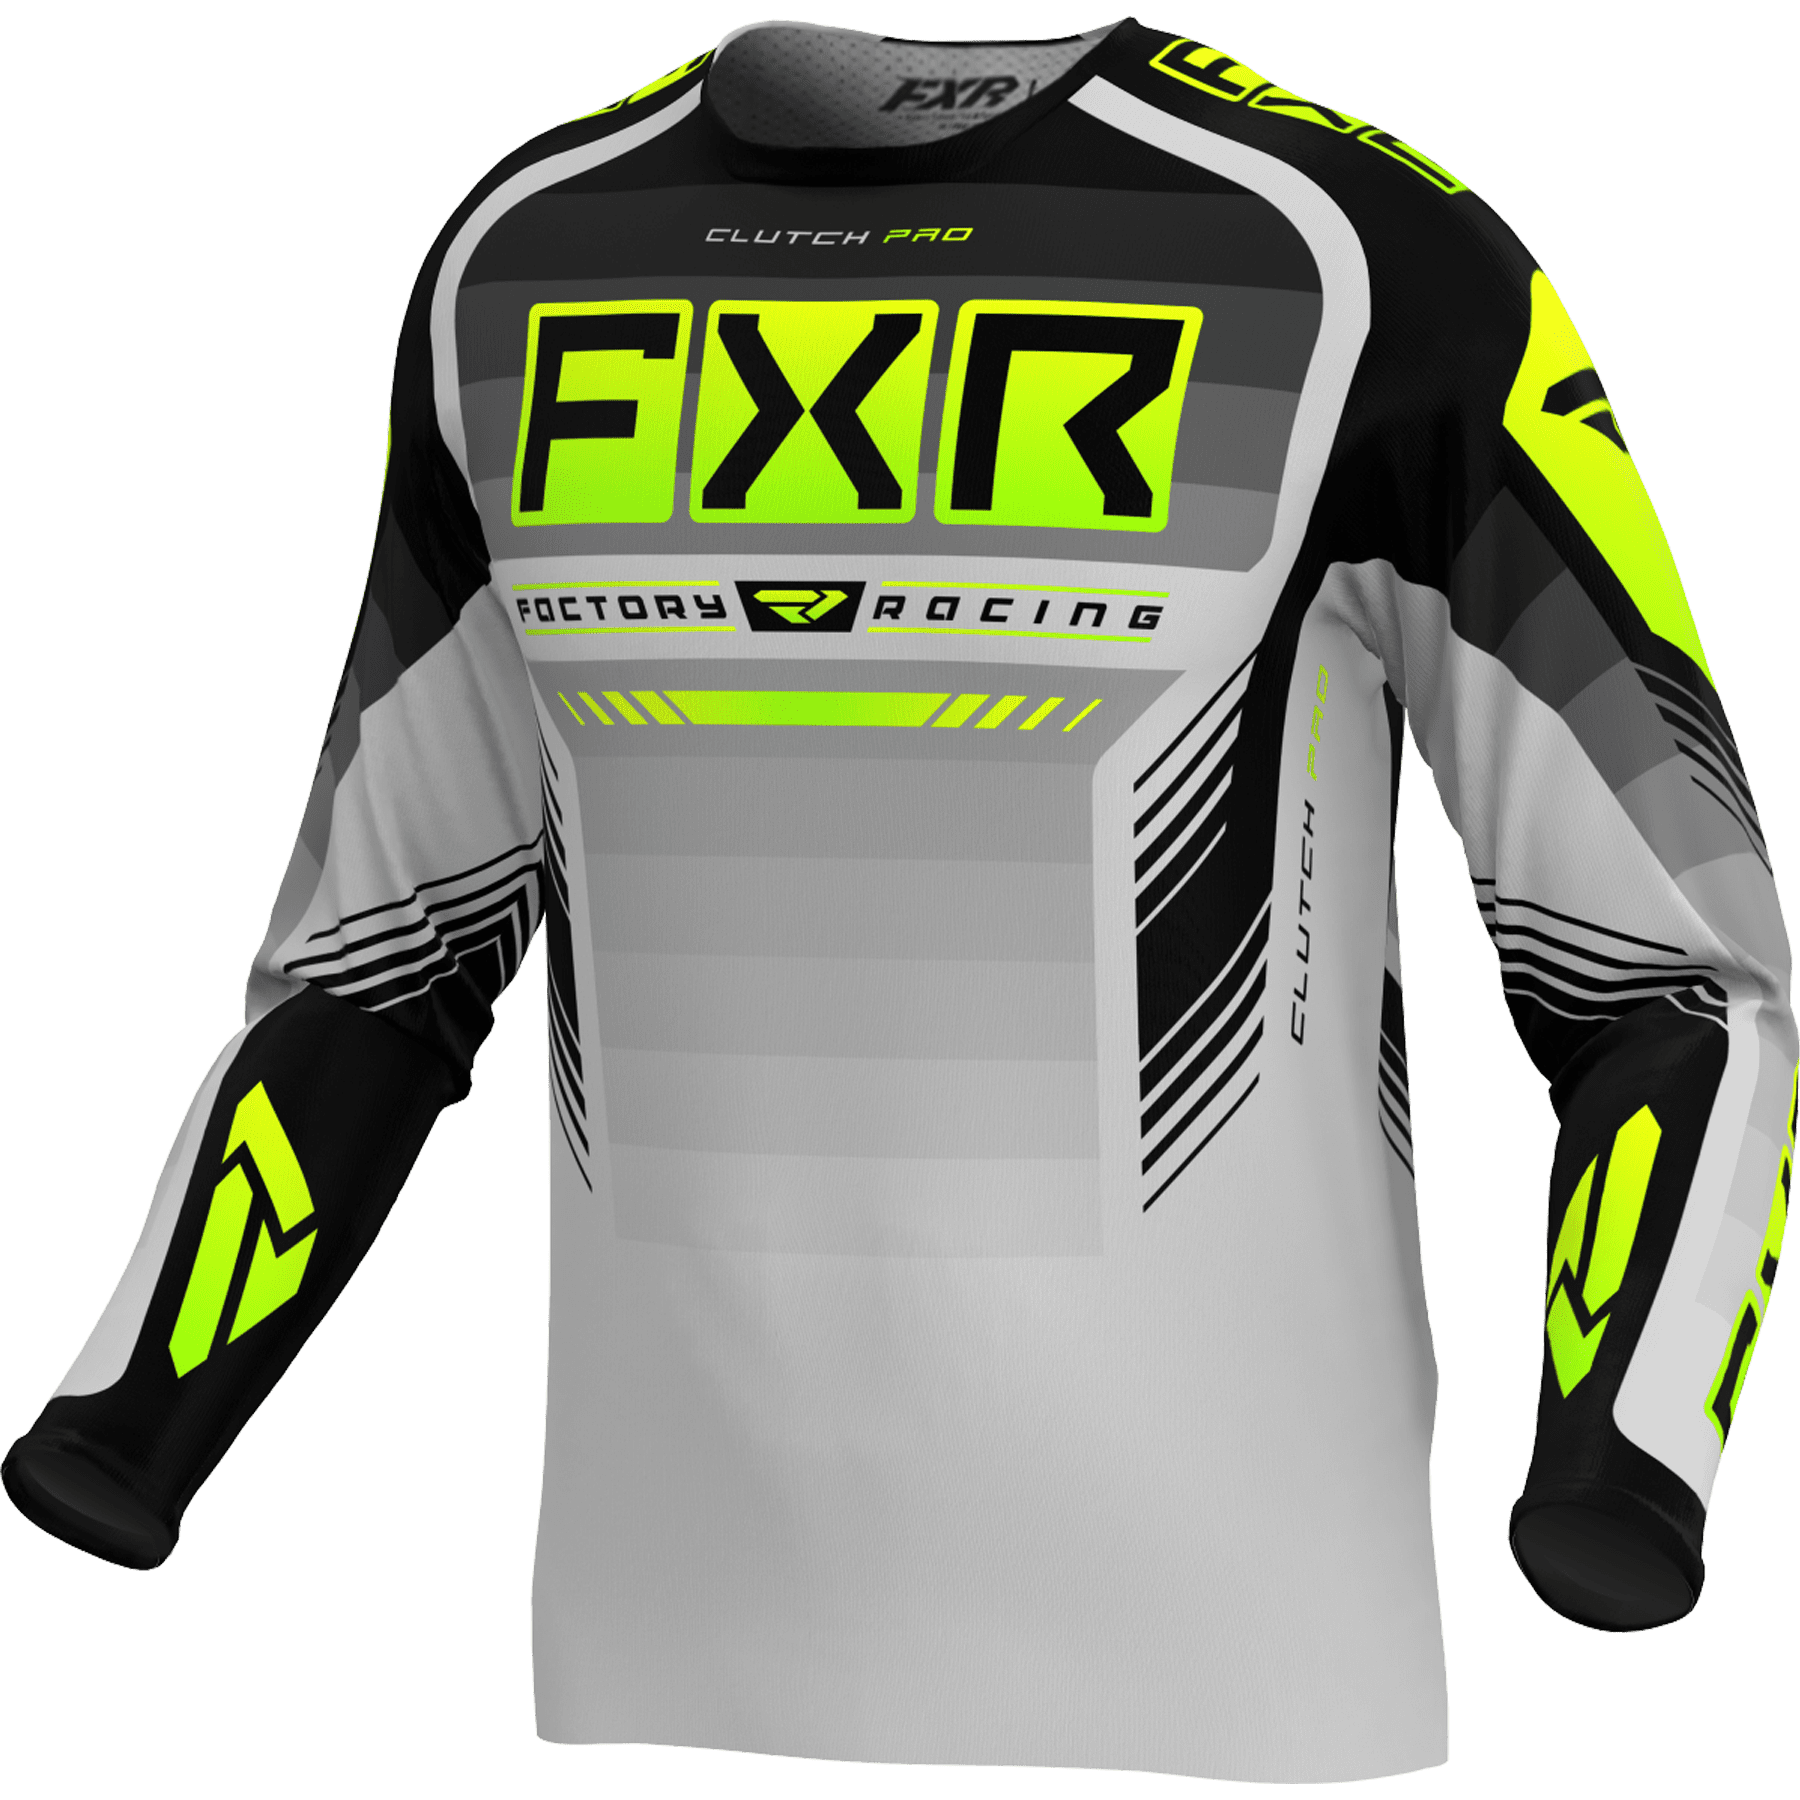 MAILLOT_FXR_ClutchPro_MXJersey_GreyBlkHiVis_front